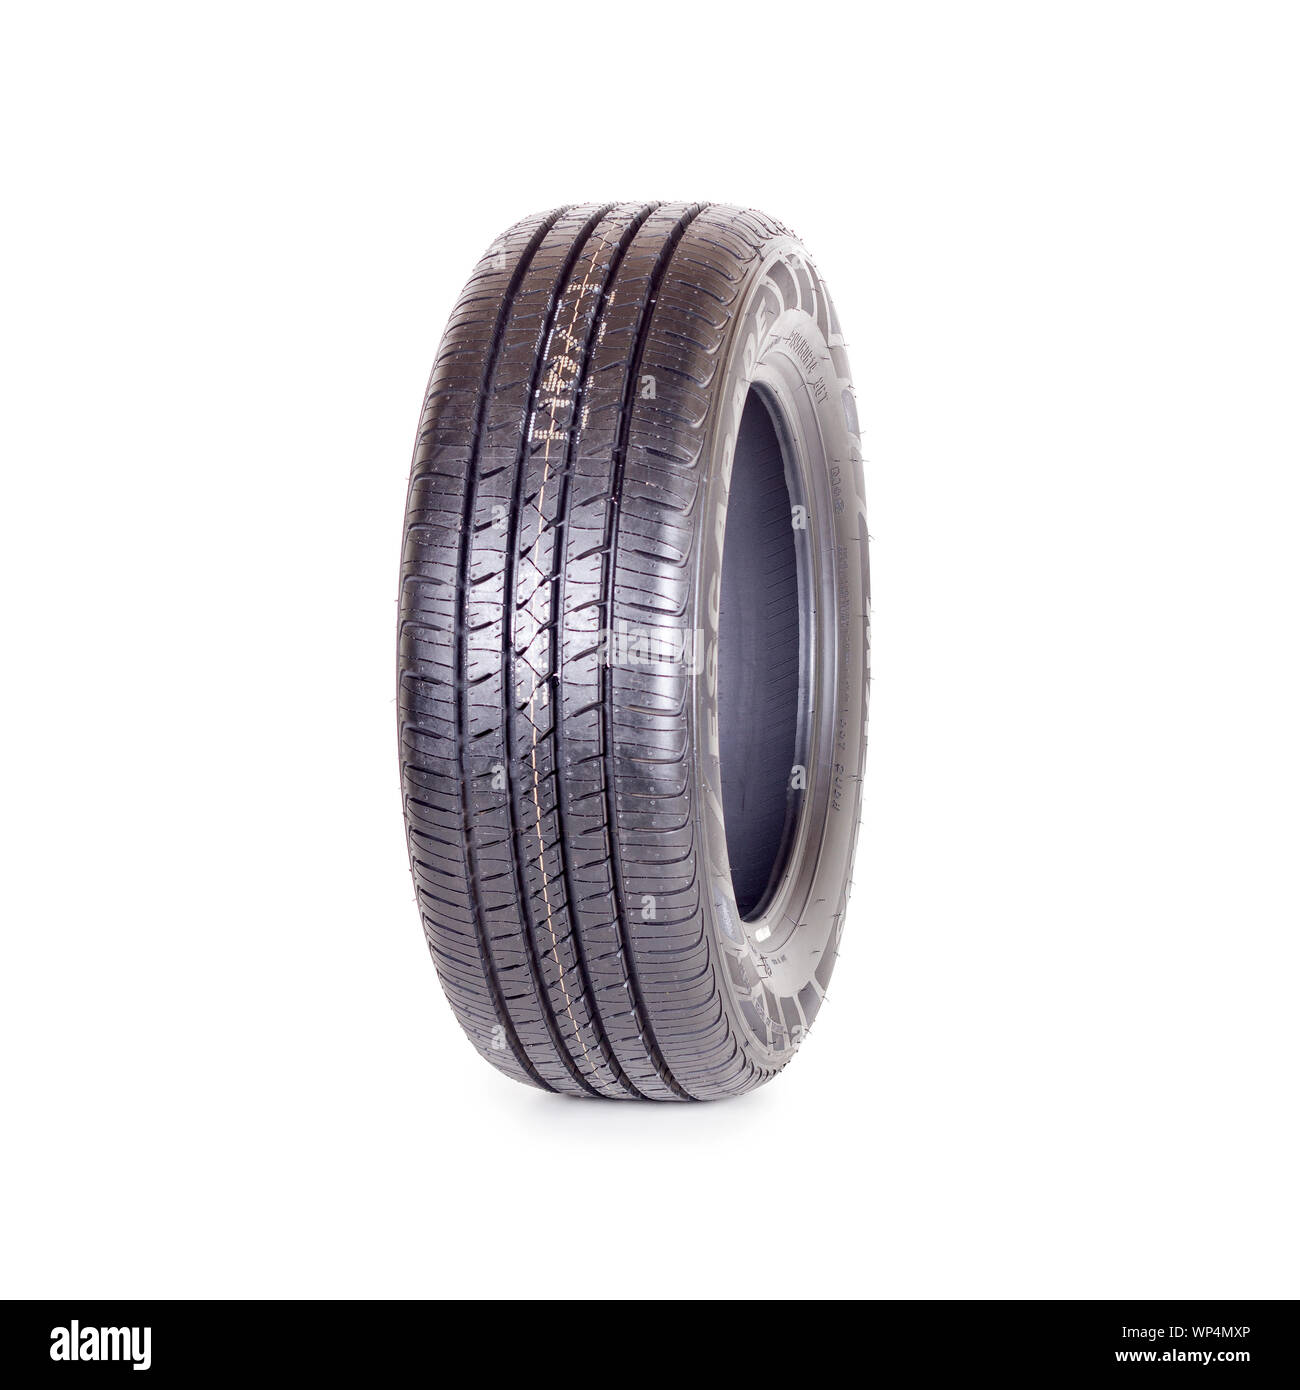 Car tire, new tyre Maxxis Escapade on white background isolated close up Stock Photo